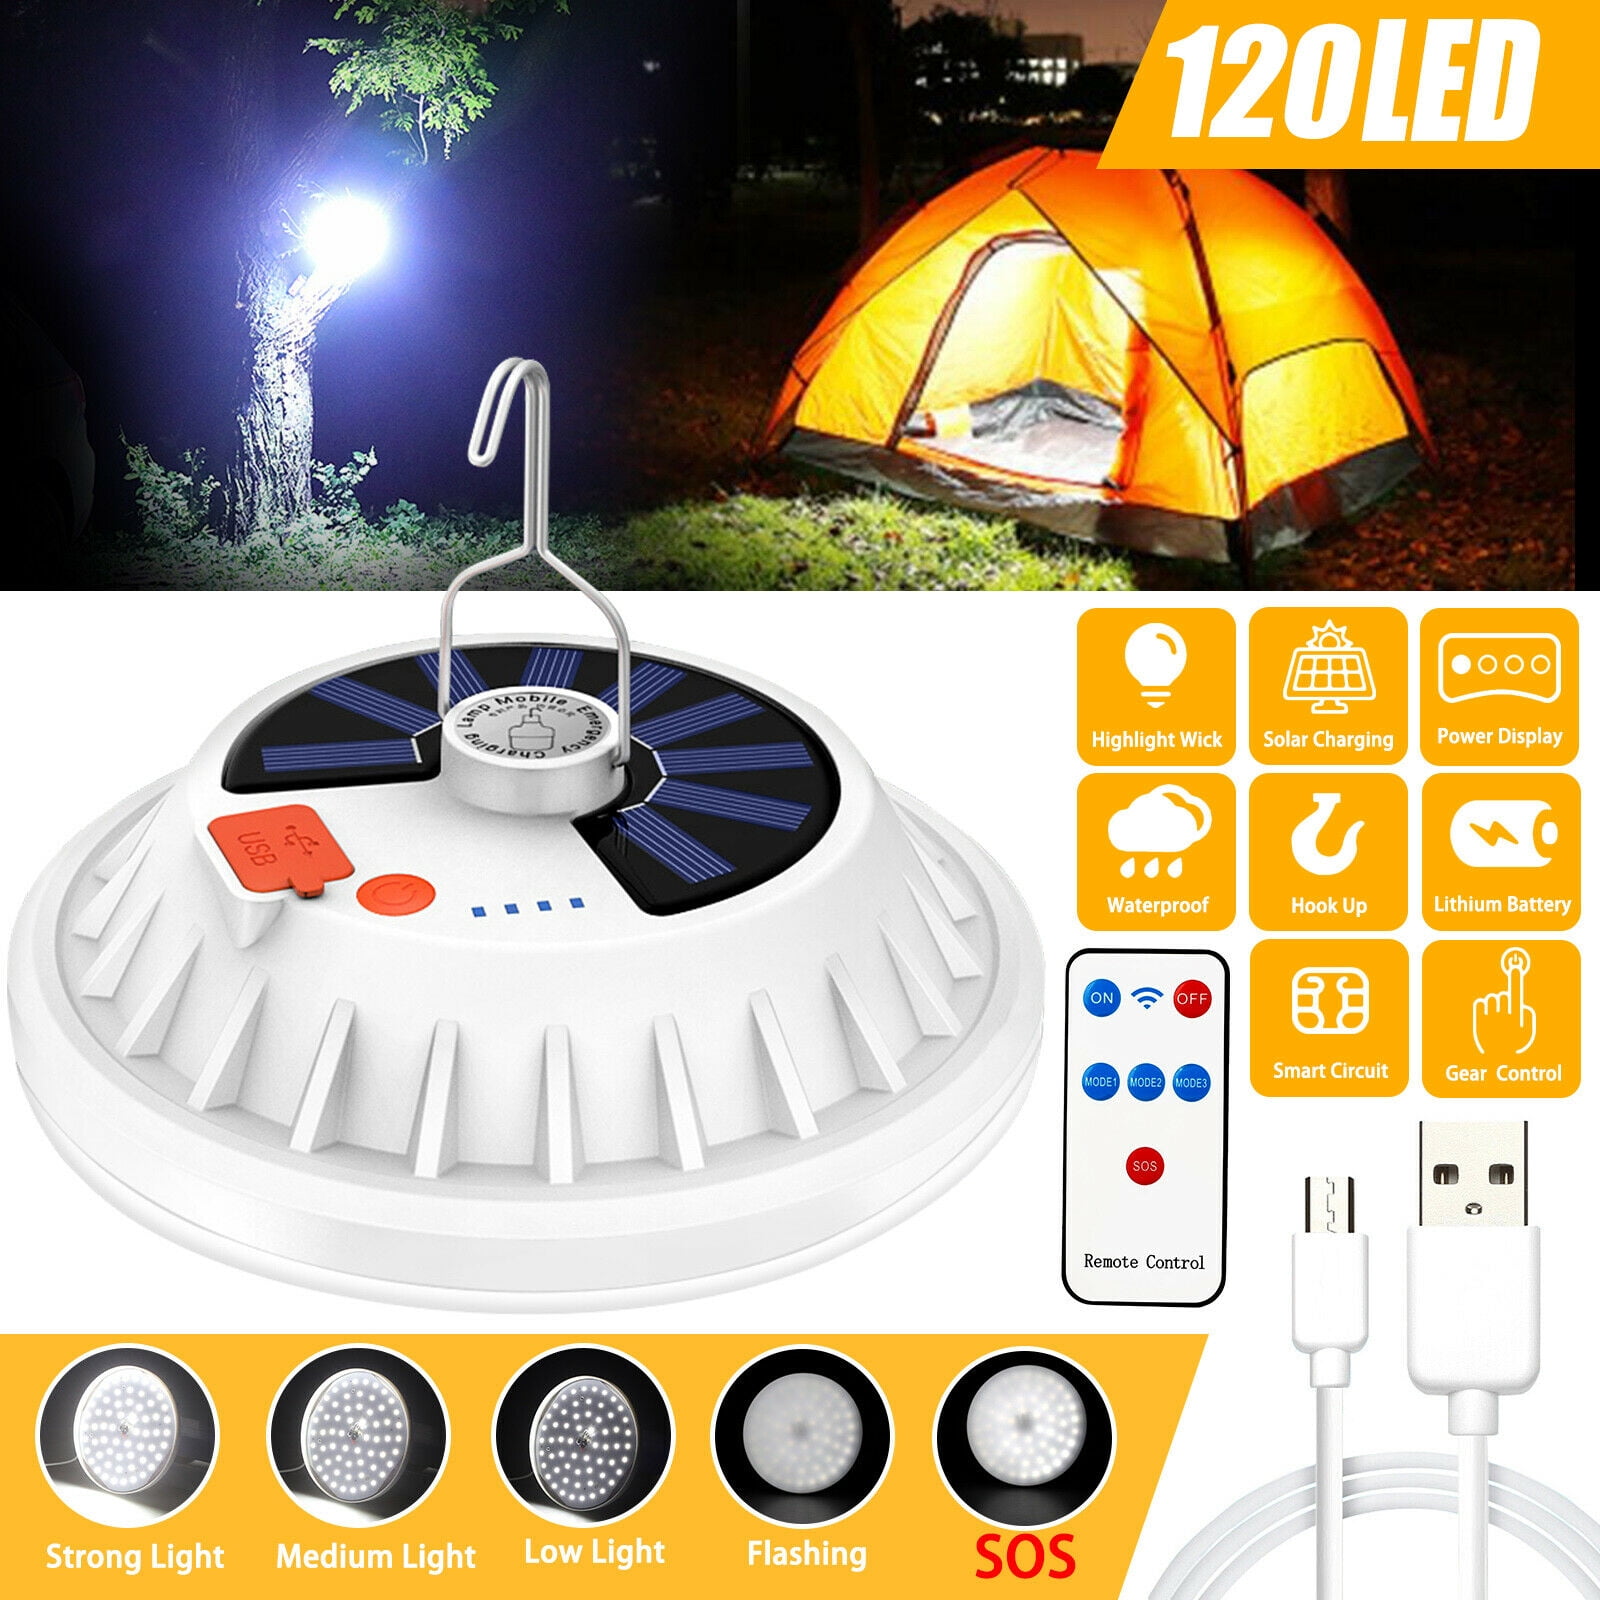 Rechargeable 120 LED Outdoor Camping Tent Light USB & Solar Lantern Hiking Lamp 